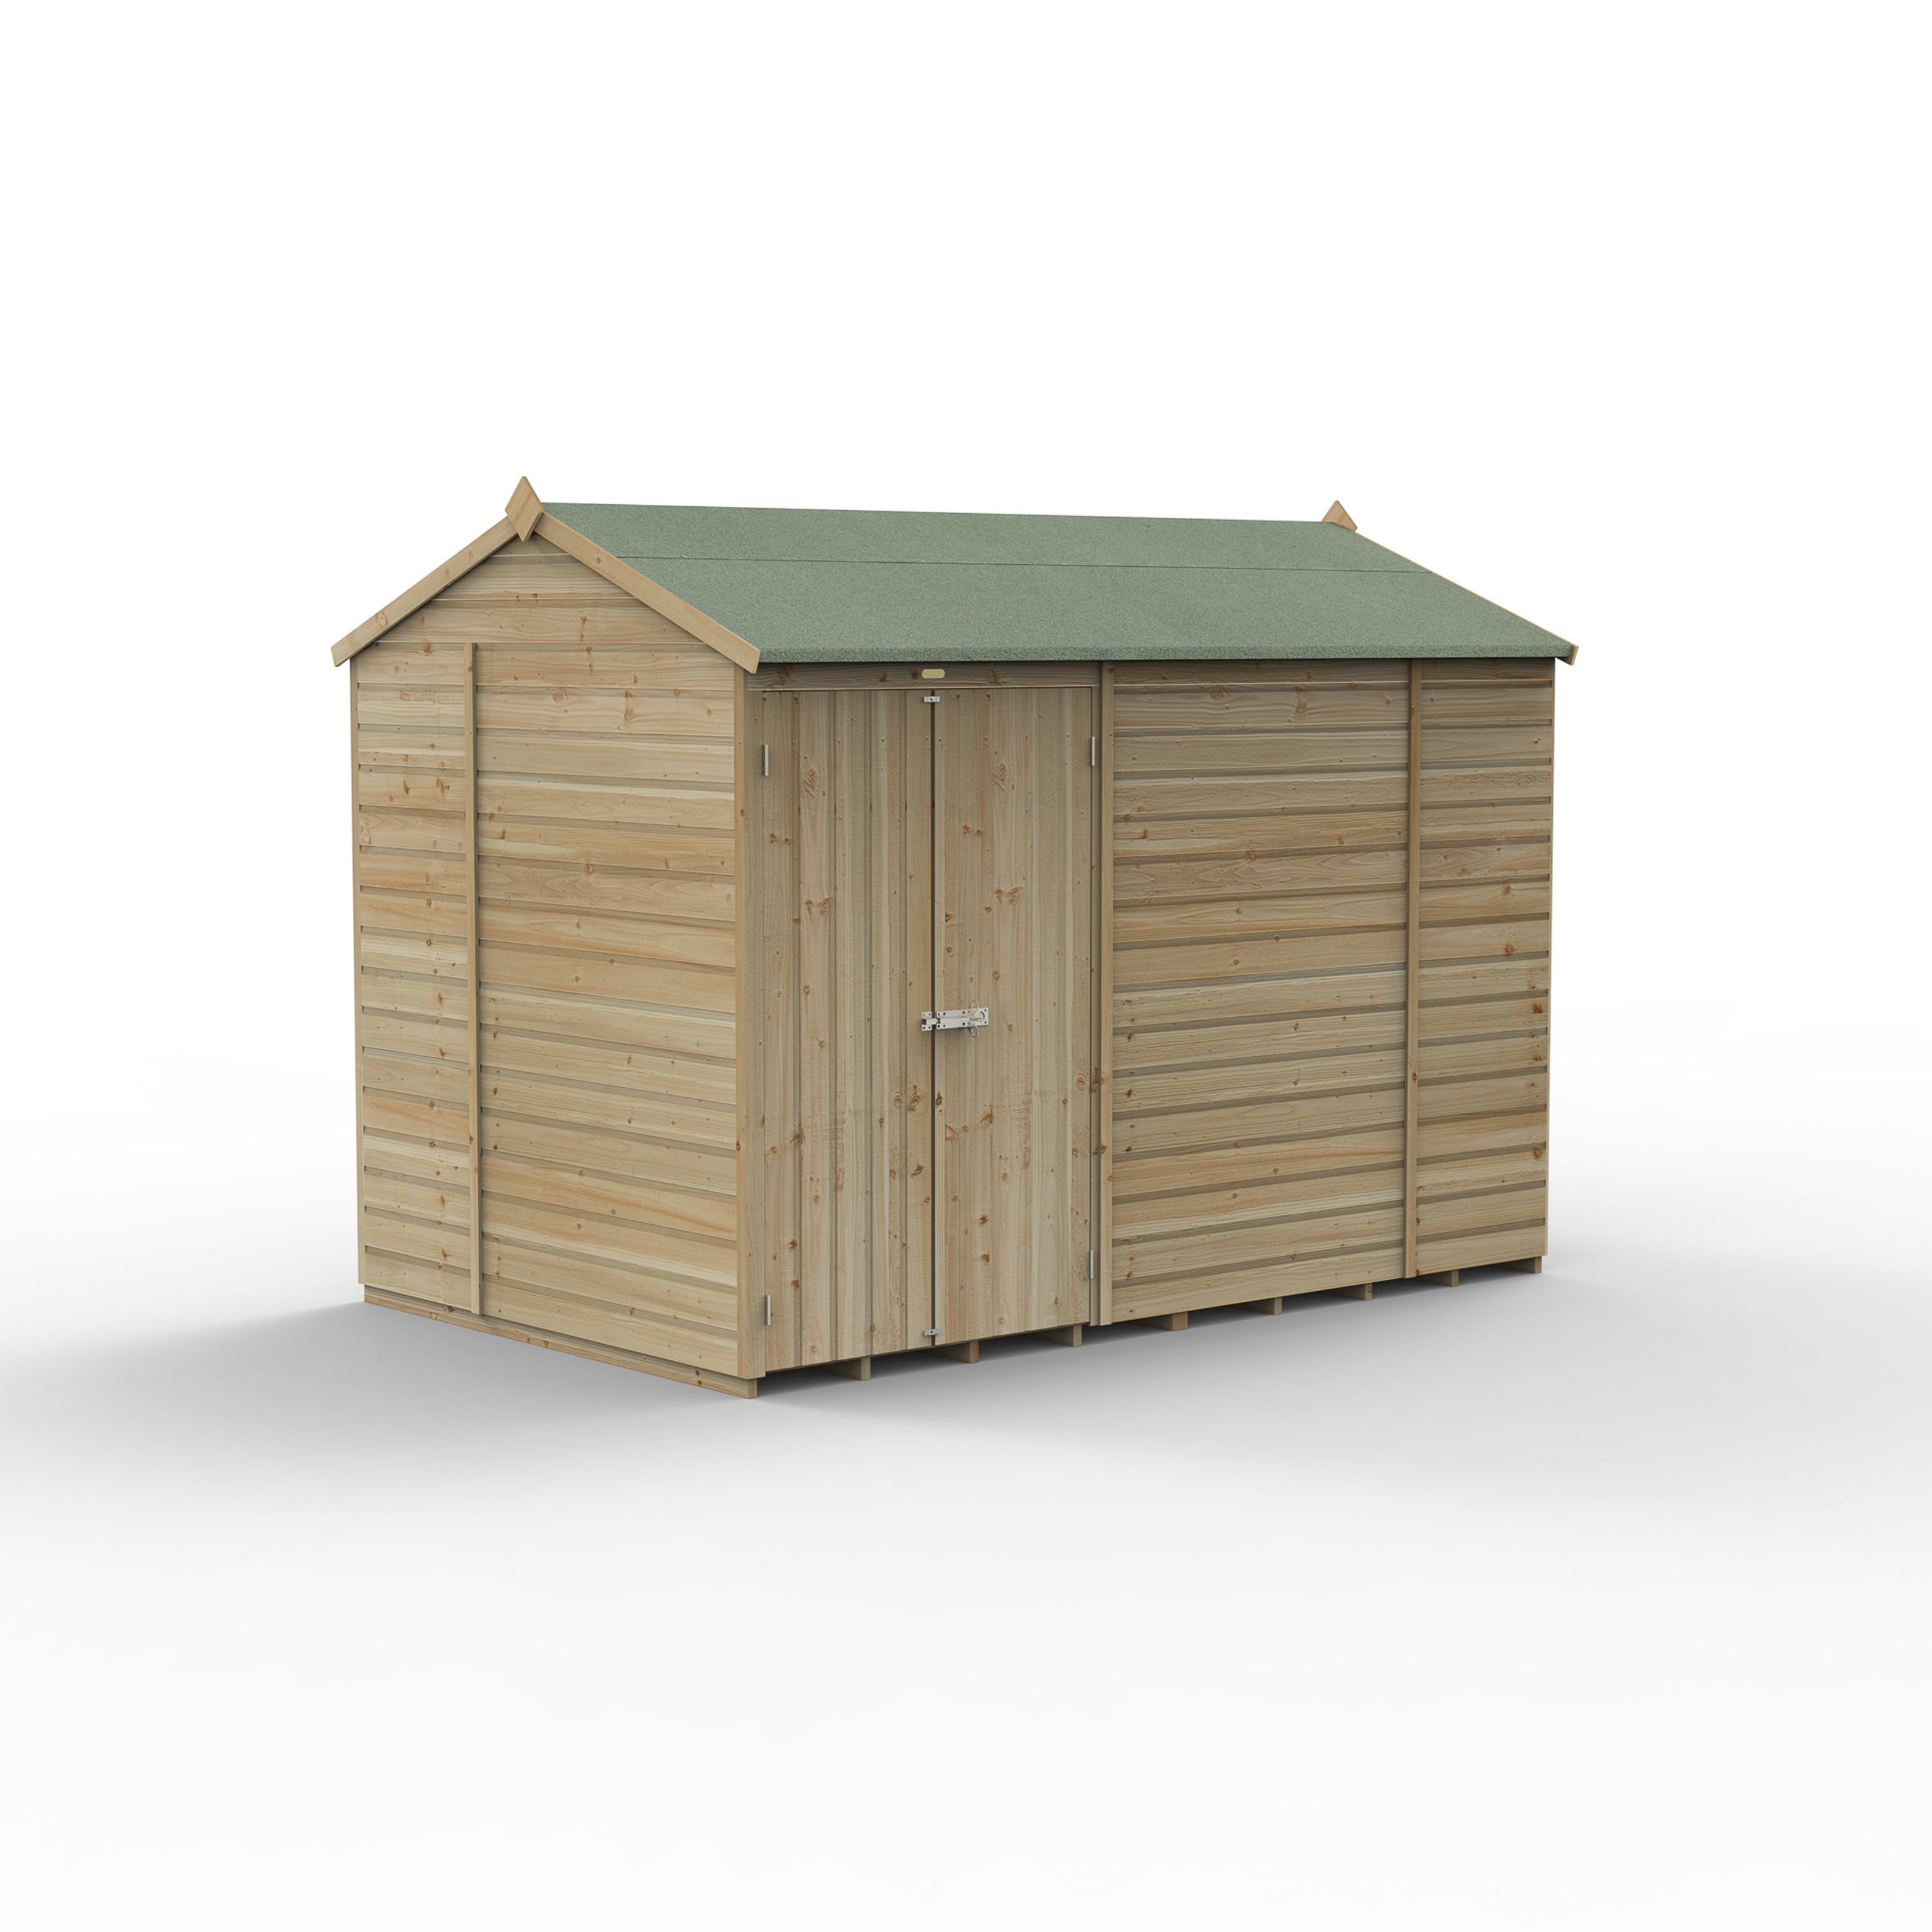 Forest Garden Beckwood 10x6 ft Reverse apex Natural timber Wooden 2 door Shed with floor